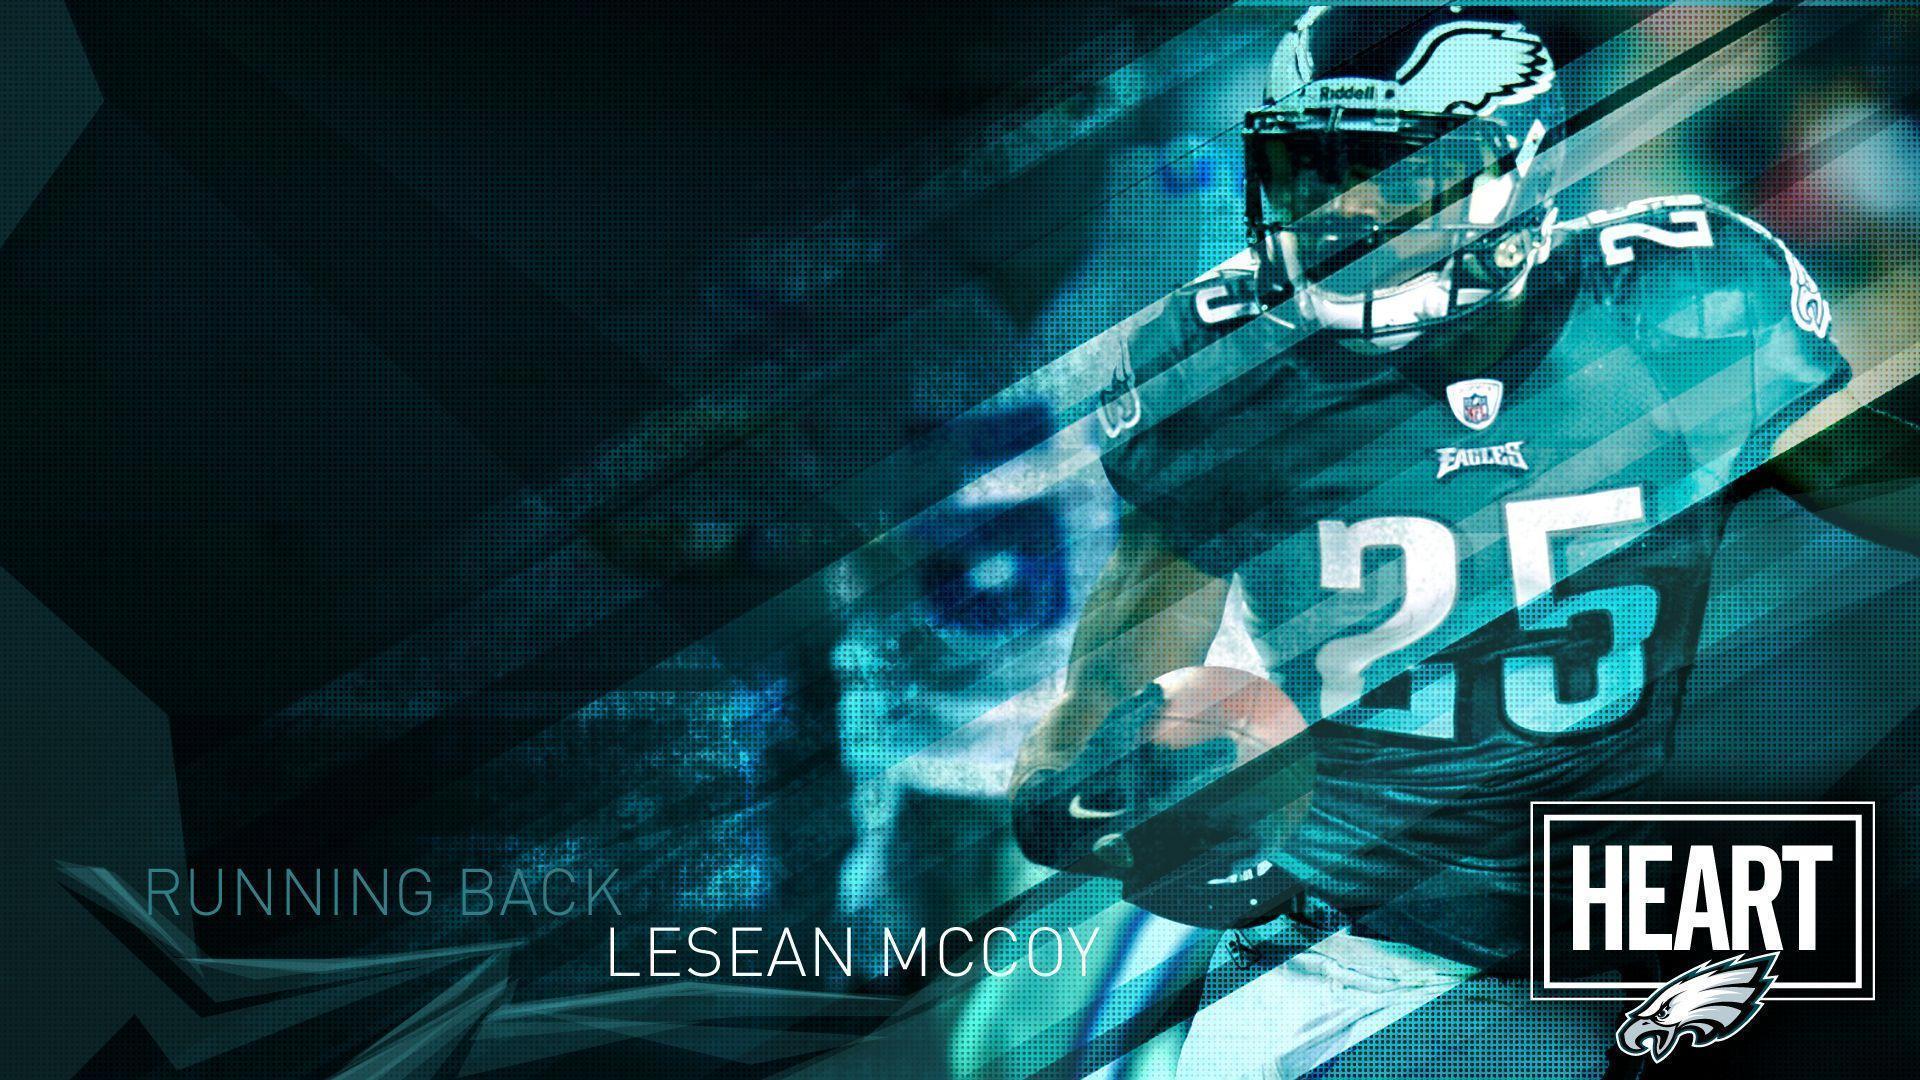 Player Nfl Eagles Wallpaper Picture to